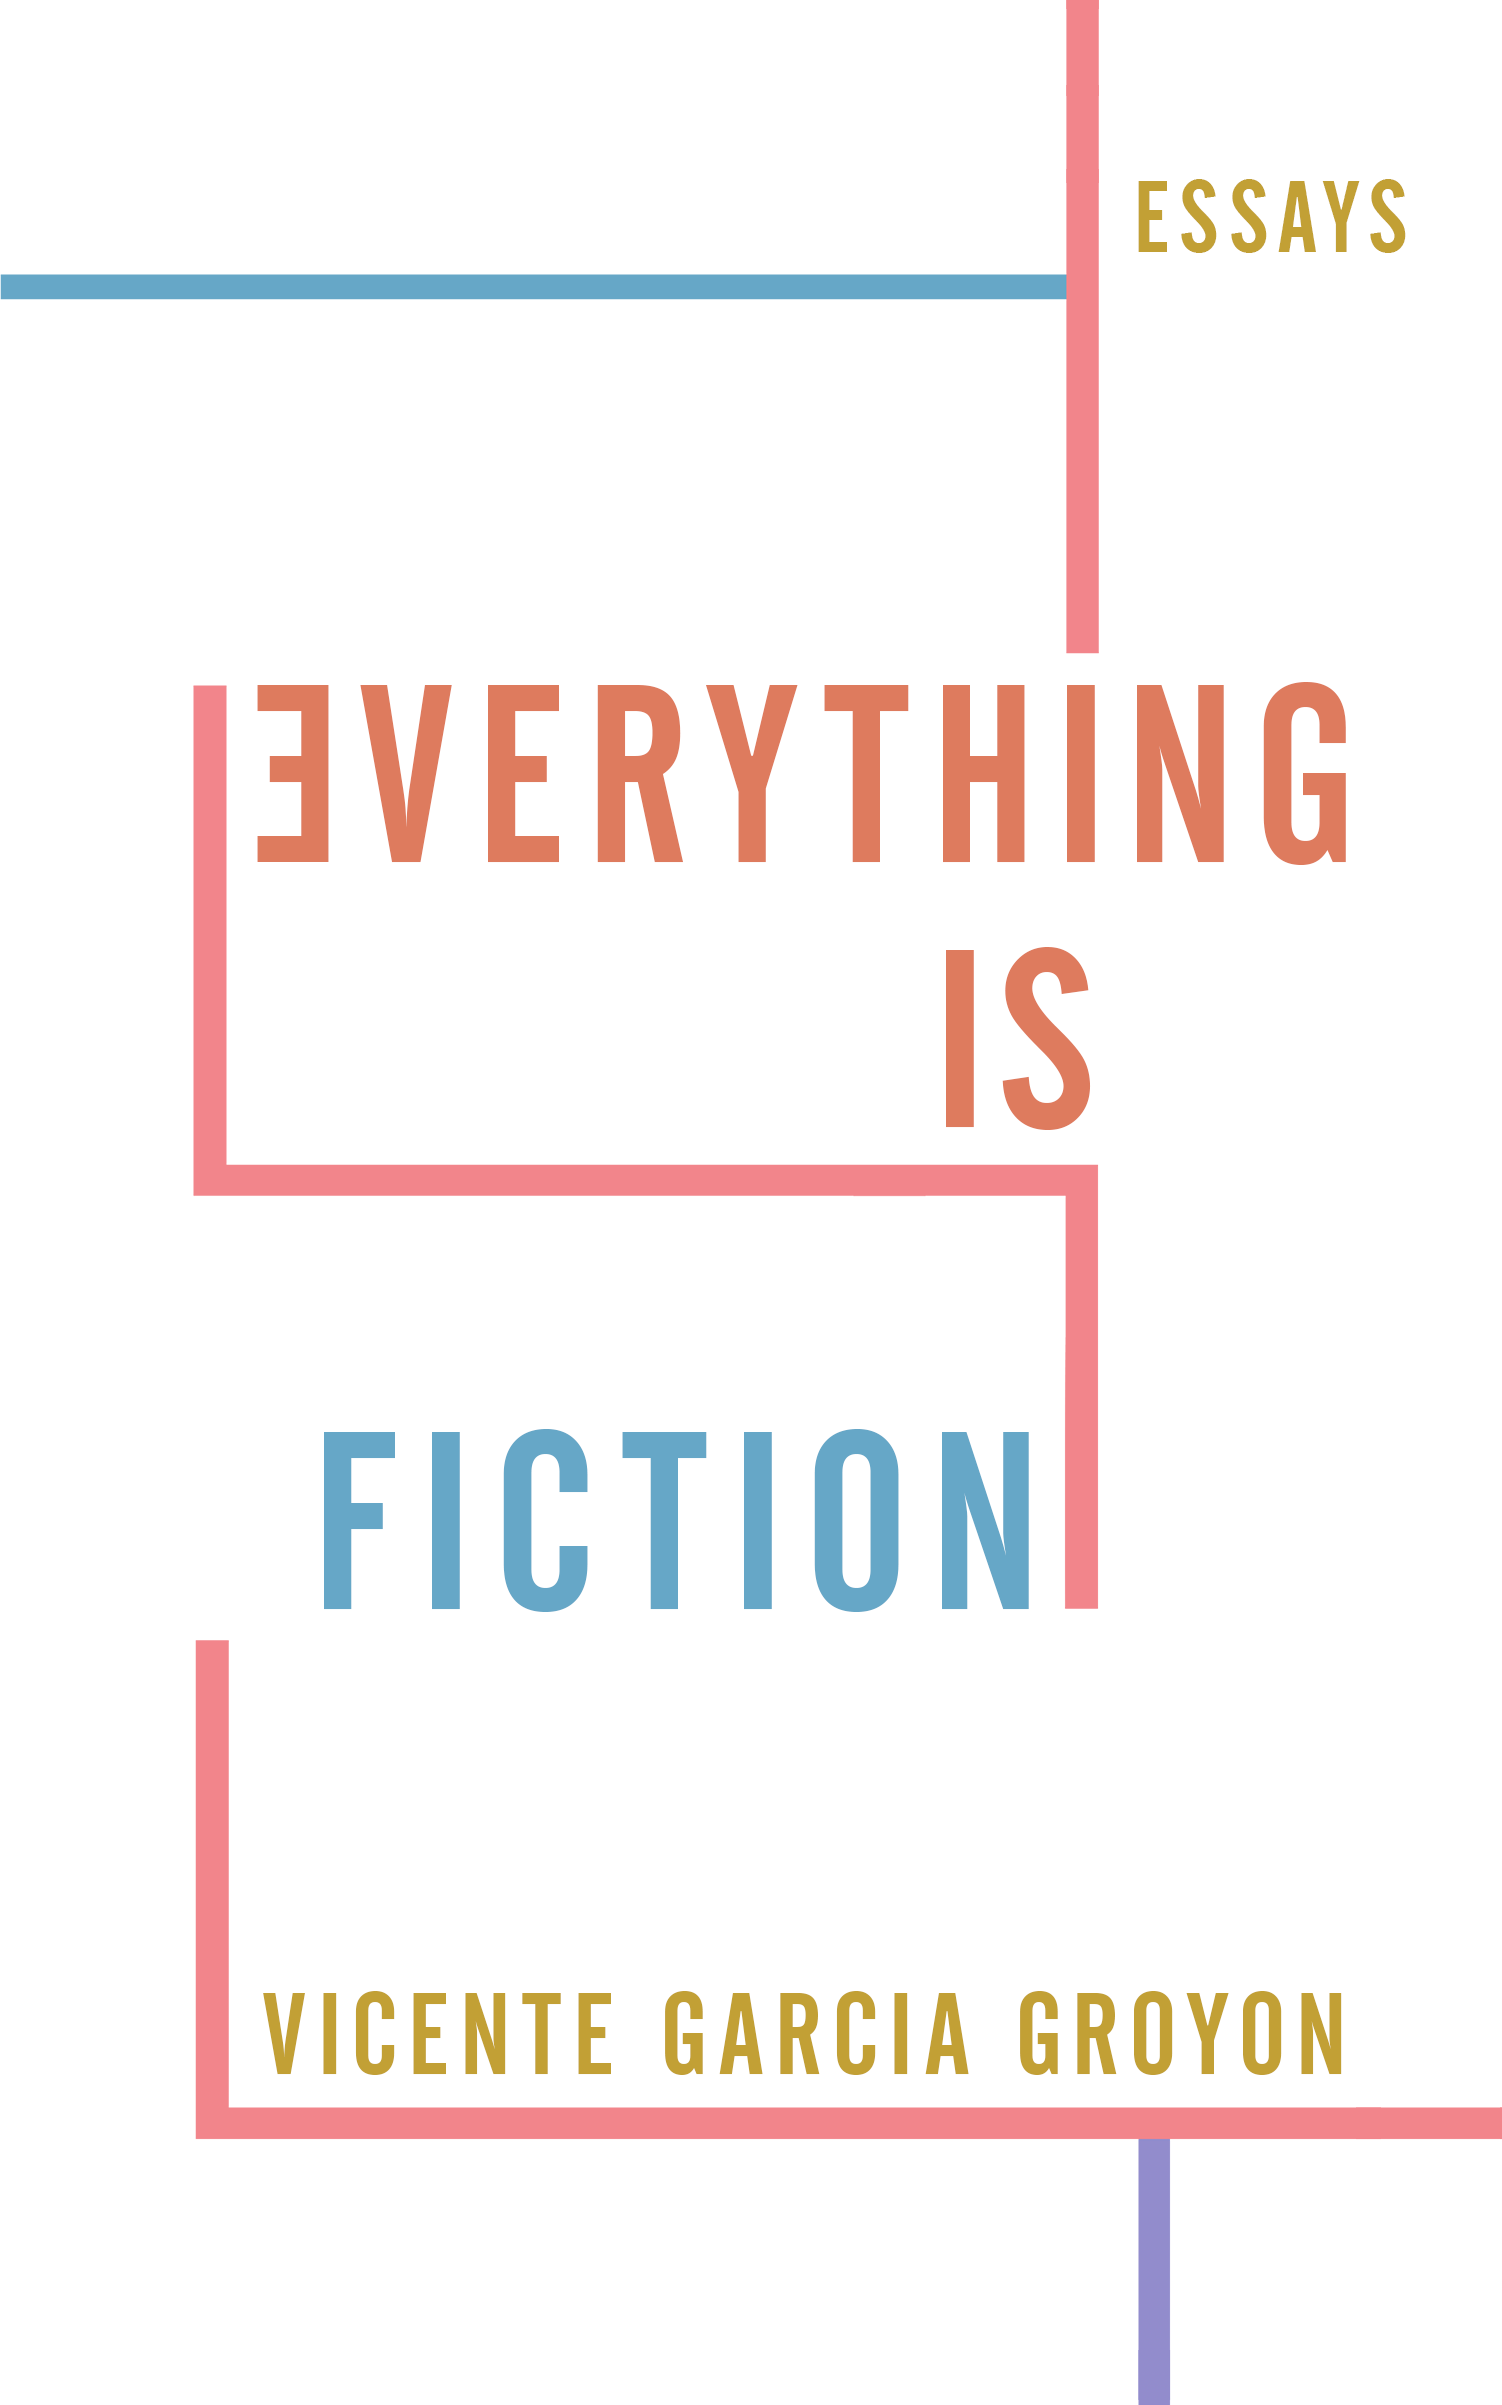 Book cover of Everything Is Fiction: Essays by Vicente Garcia Groyon published by Ateneo University Press